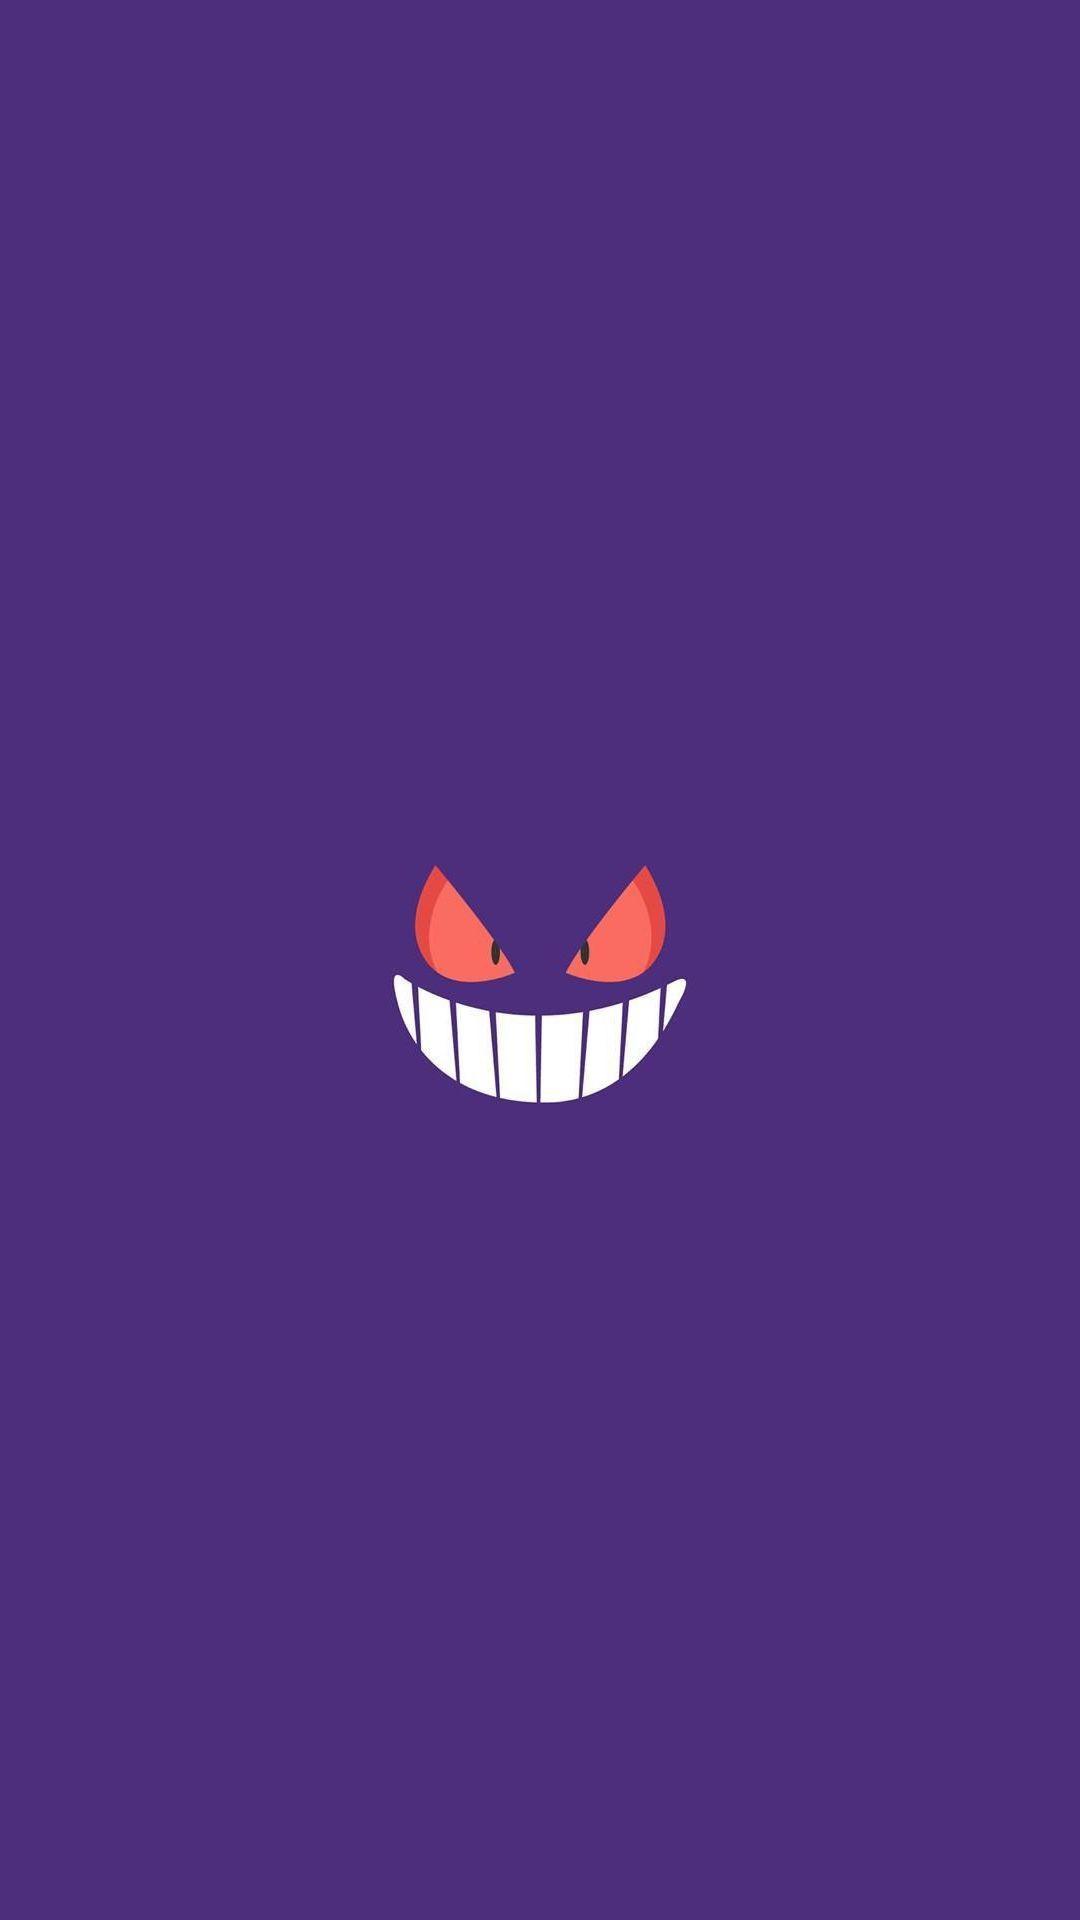 Gengar wallpaper drawn for me by my mrs hope you dig it as much as I do   riphonewallpapers